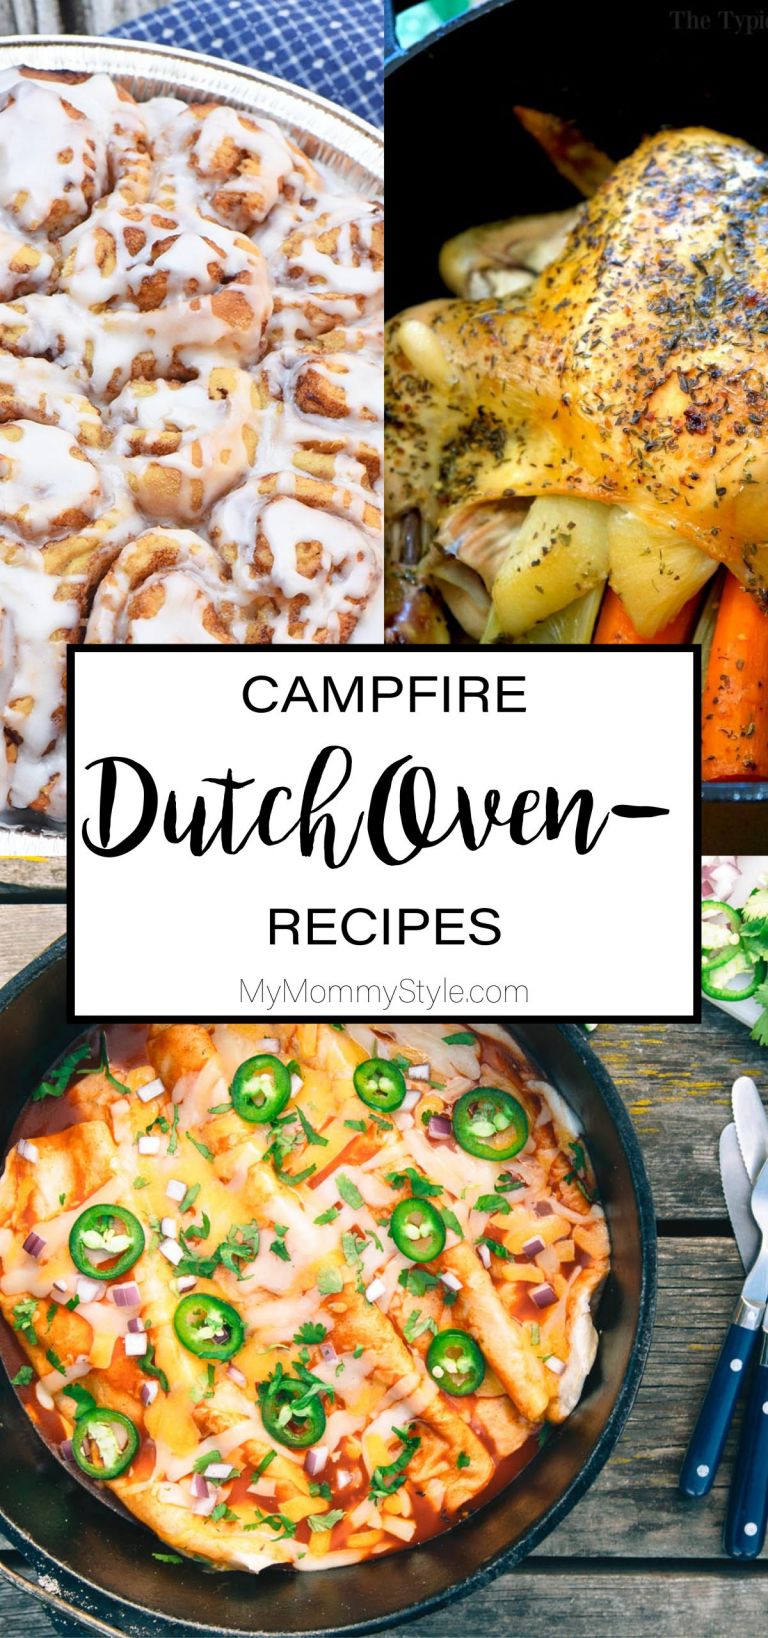 https://www.mymommystyle.com/wp-content/uploads/2020/03/CAMPFIRE-DUTCH-OVEN-RECIPES(pp_w768_h1638).jpg